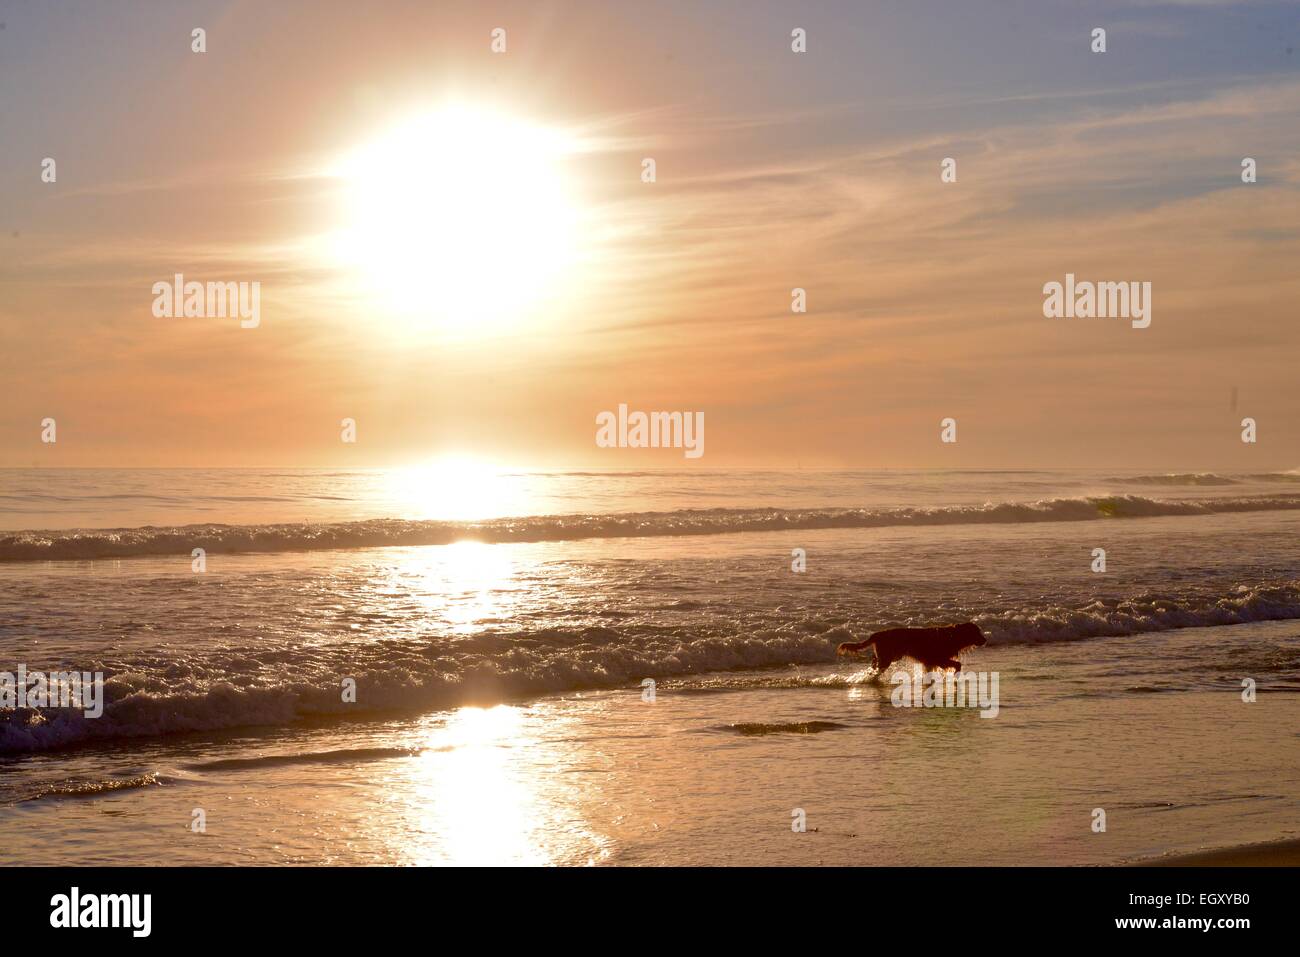 Dog running in surf during sunset with lens flare Stock Photo